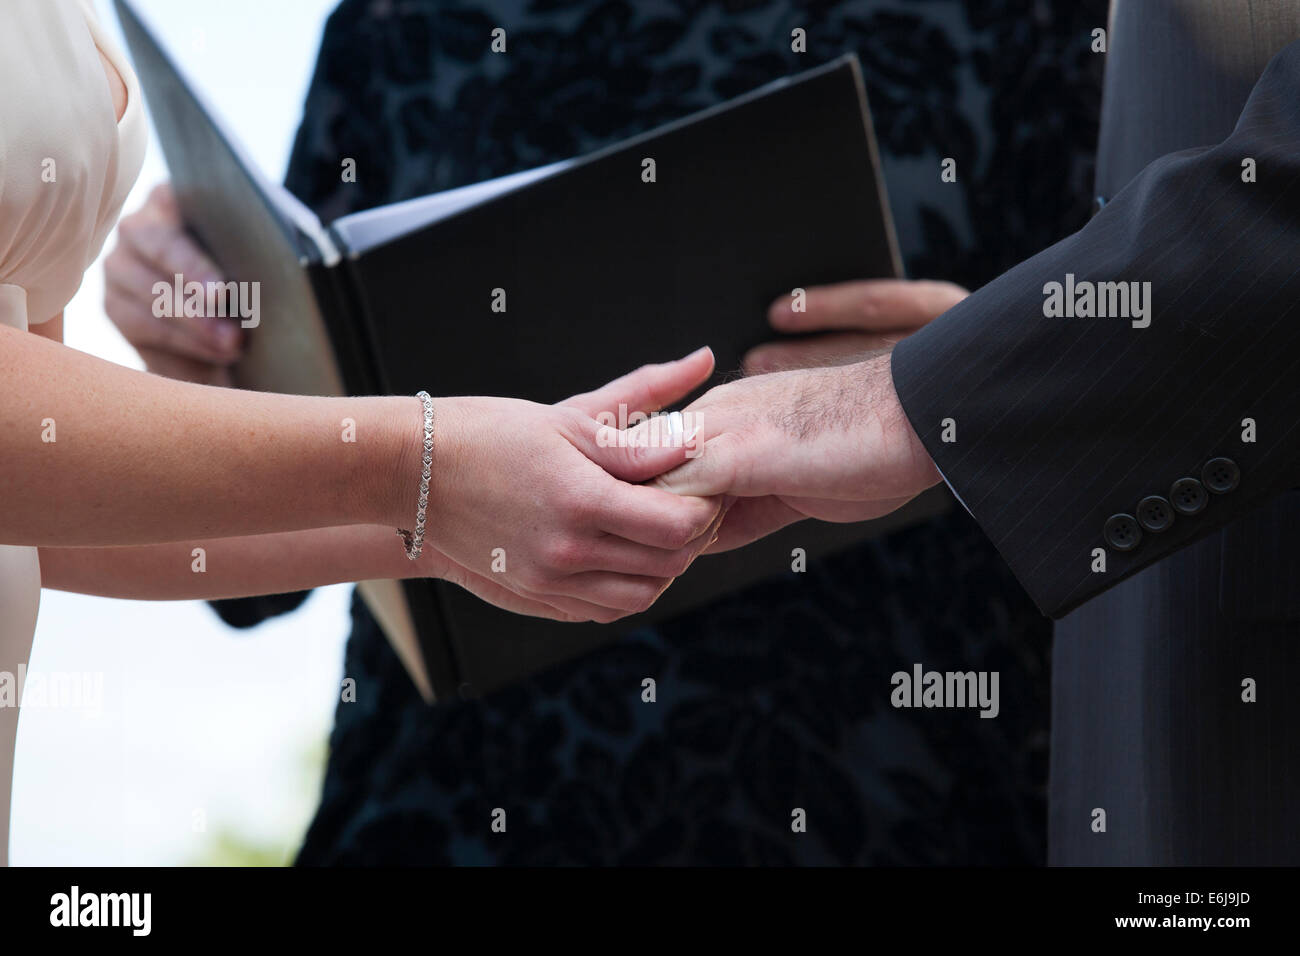 Bride and groom hold hands during their wedding vows. Hands only, no faces. Photo by Janet Worne. Stock Photo